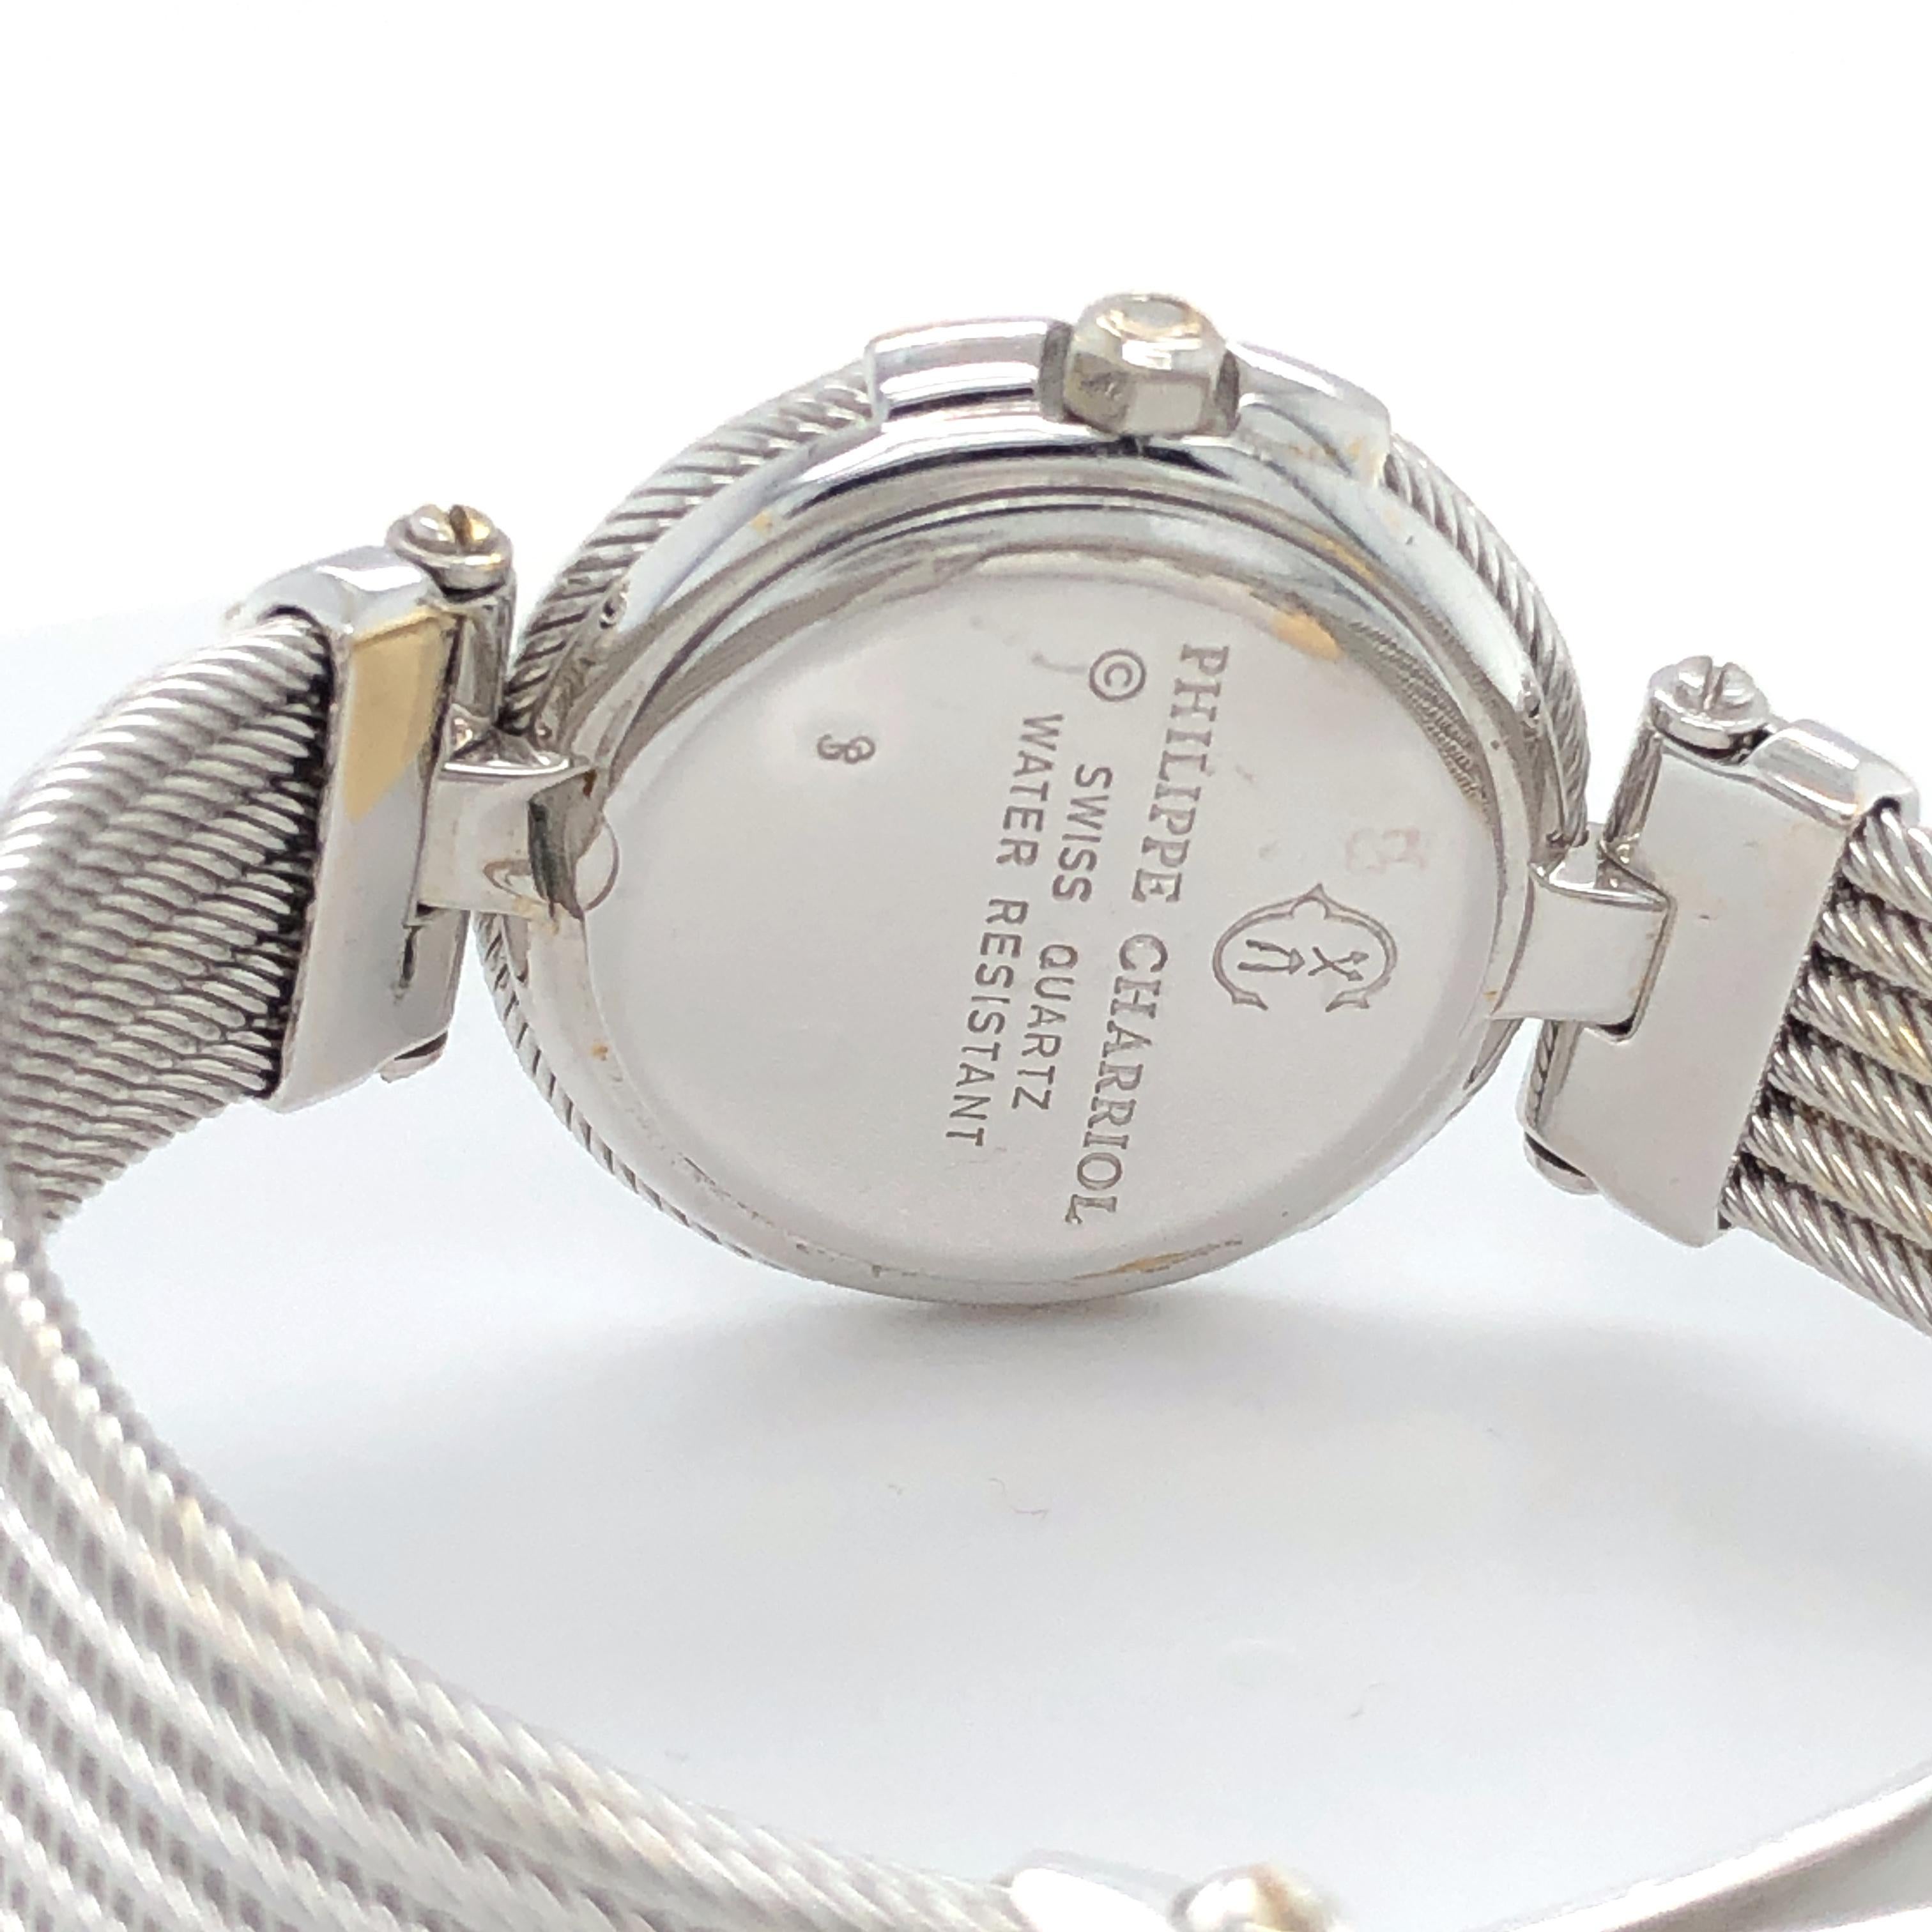 Philippe Charriol 18 Karat White Gold and Diamond Watch For Sale 1